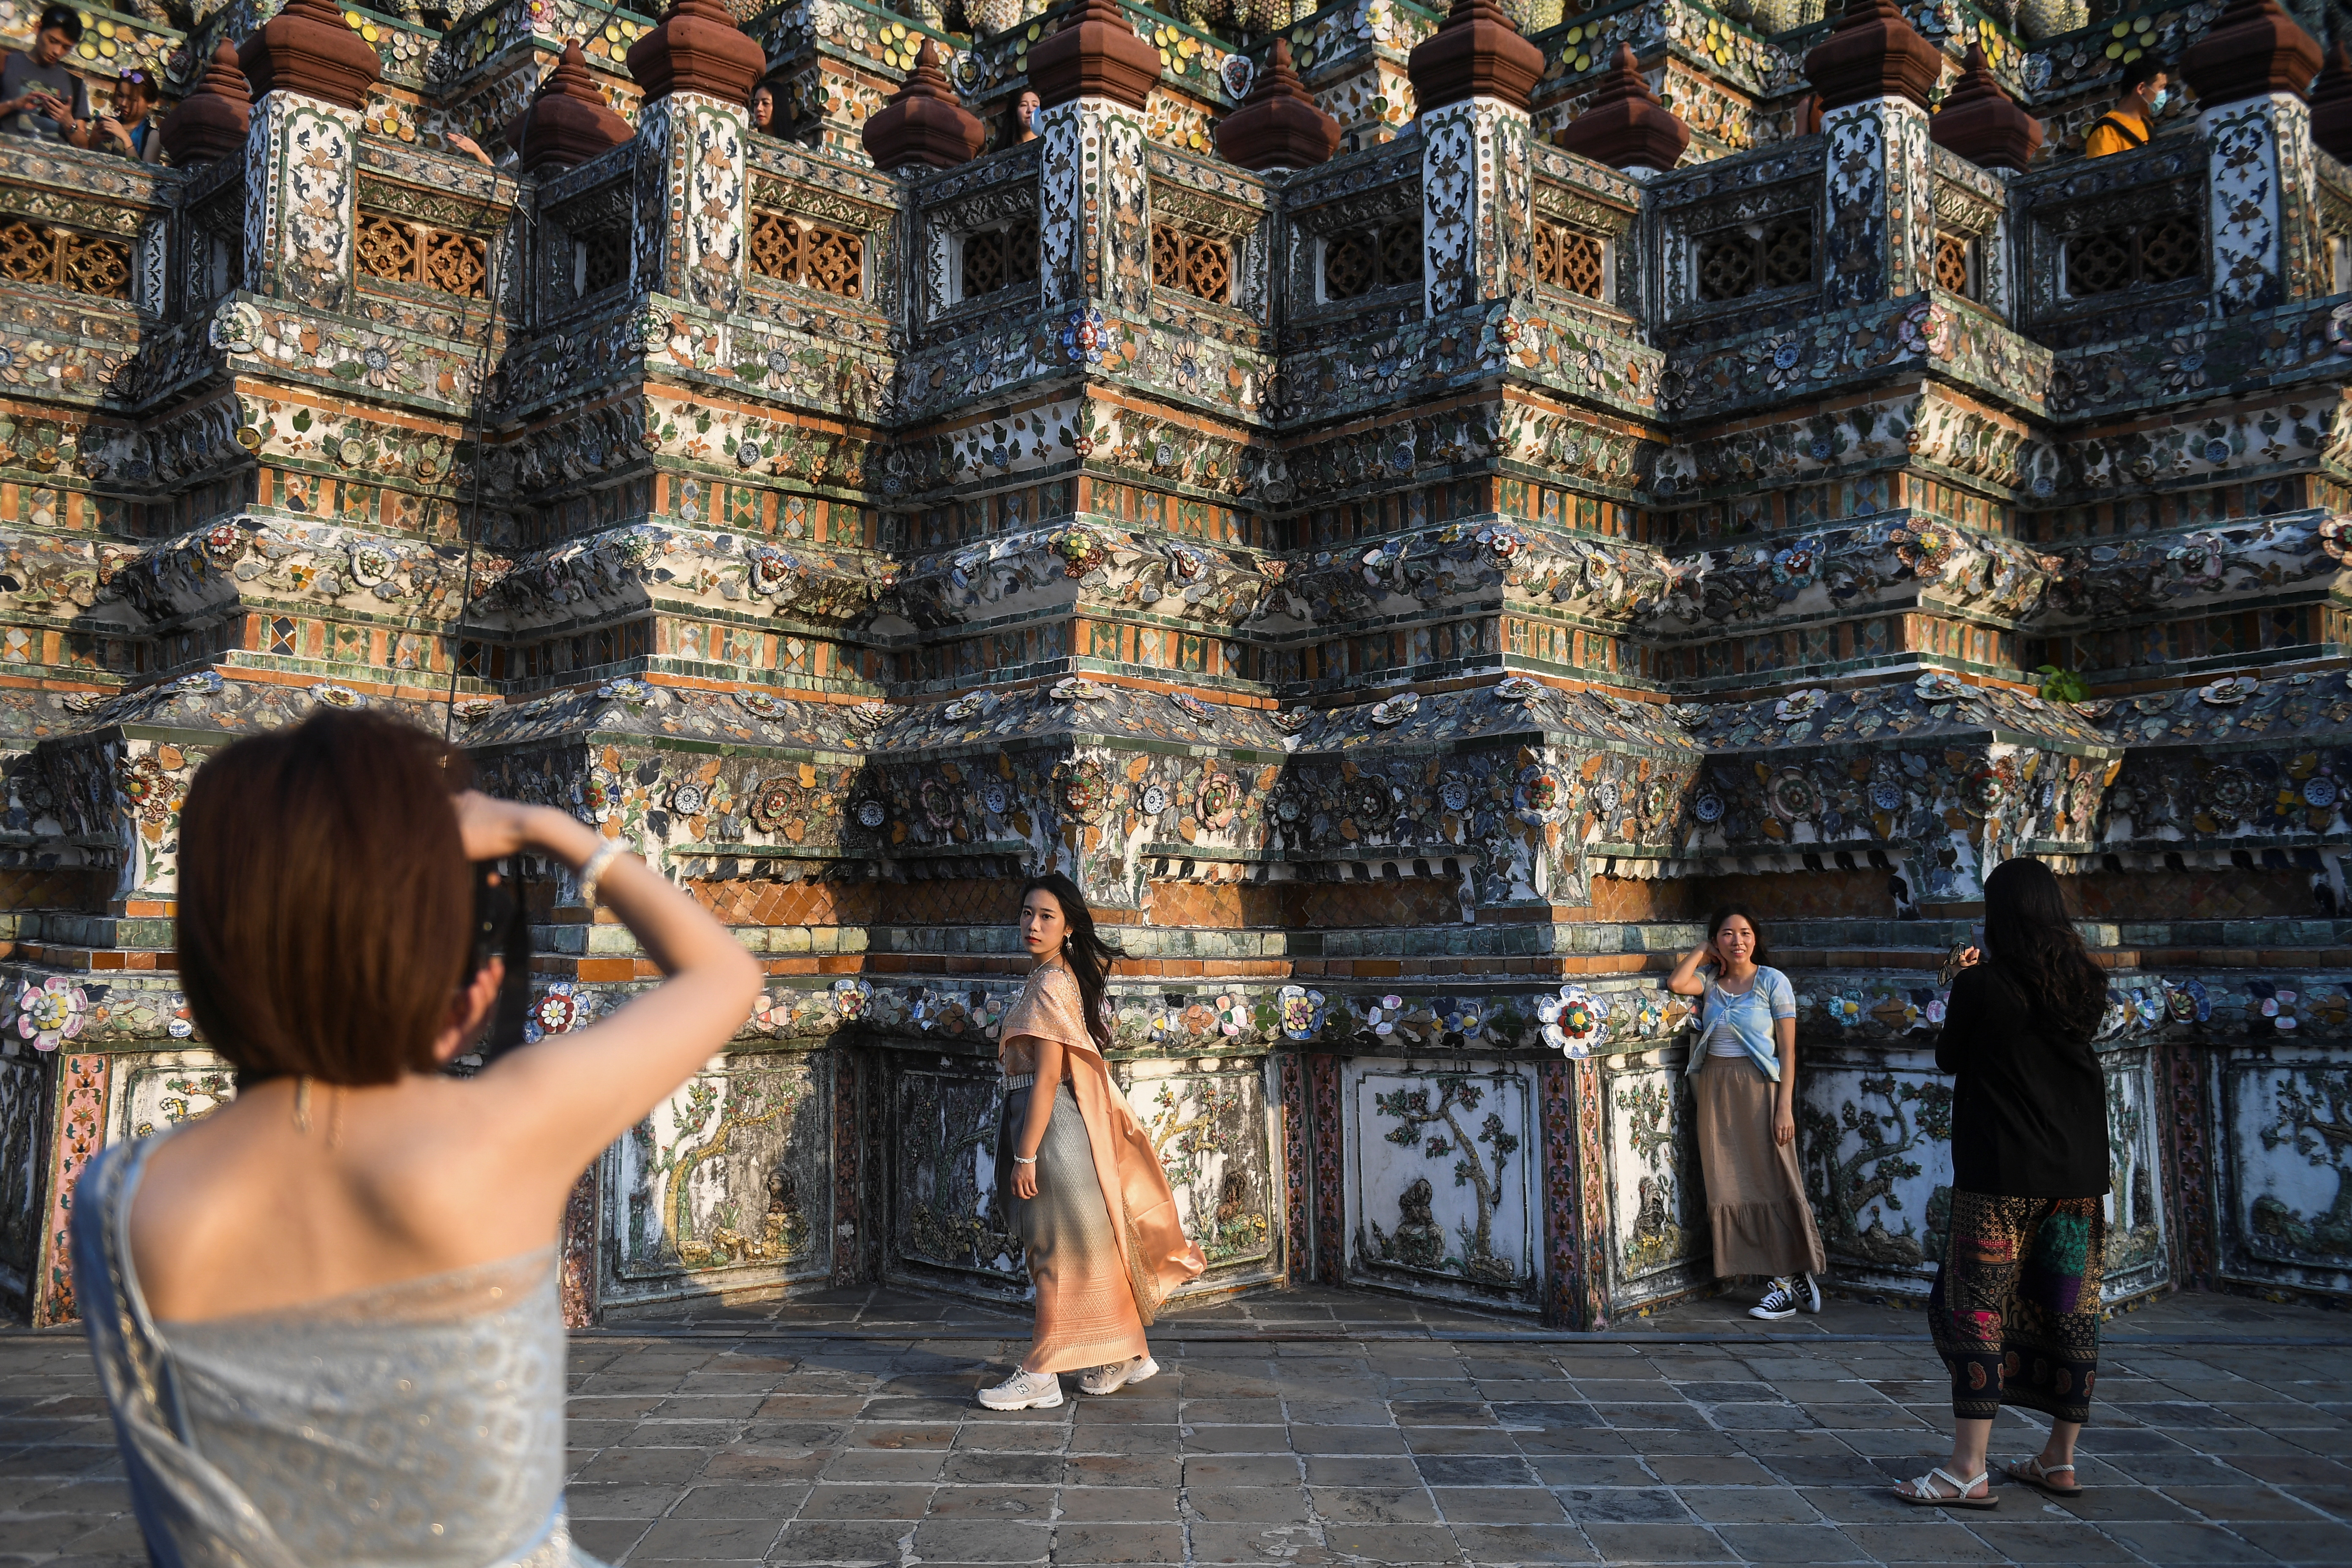 Tourists dressed in traditional Thai costumes visit Wat Arun temple in Bangkok